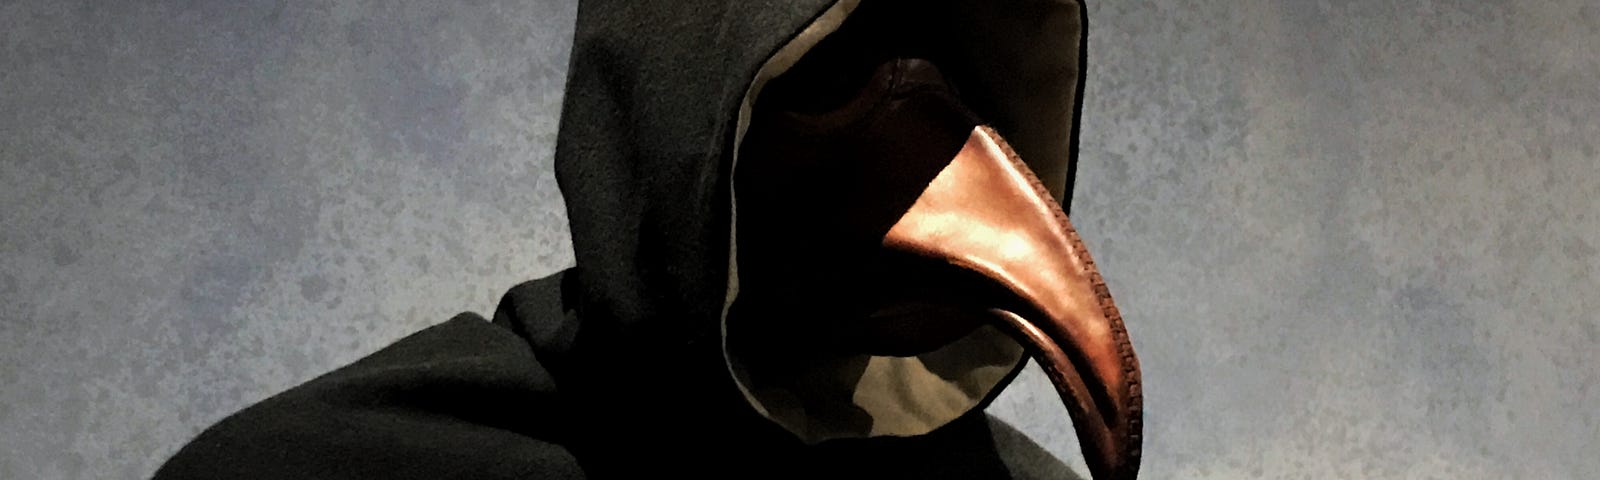 A scary looking figure in a black hood with a beak coming out.